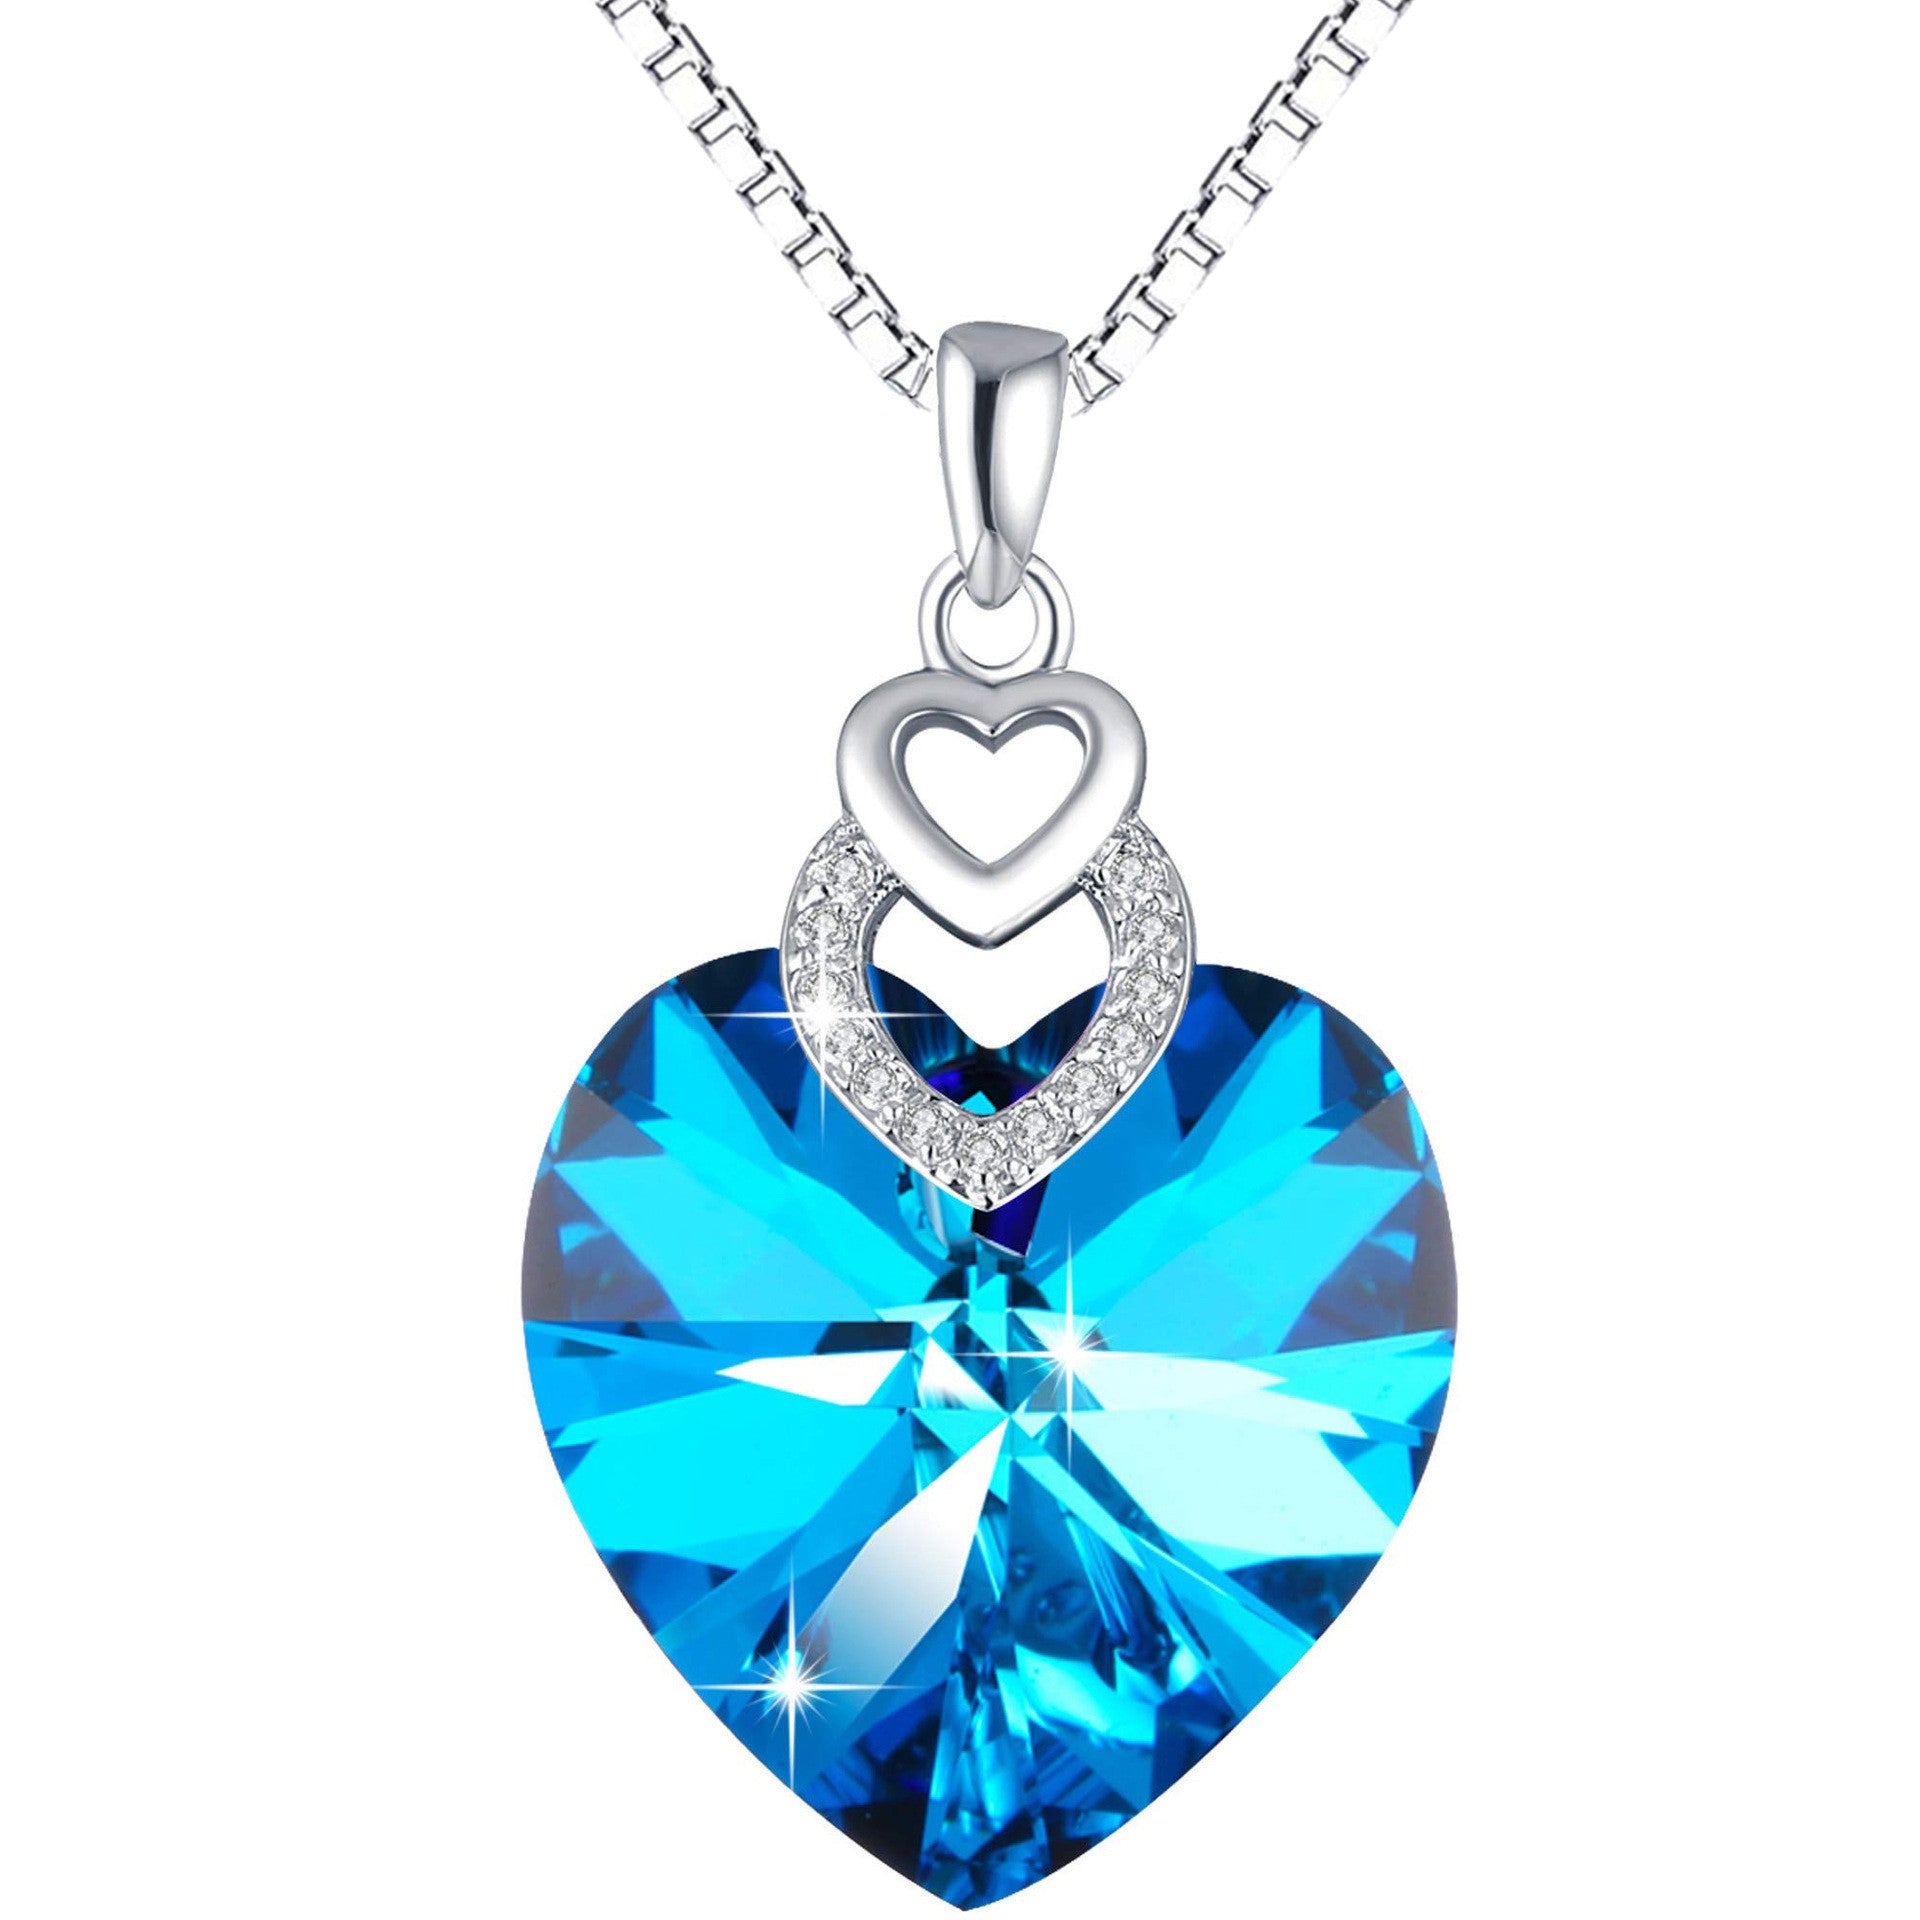 Necklace with a Simple Crystal Pendant for Women’s Fashion